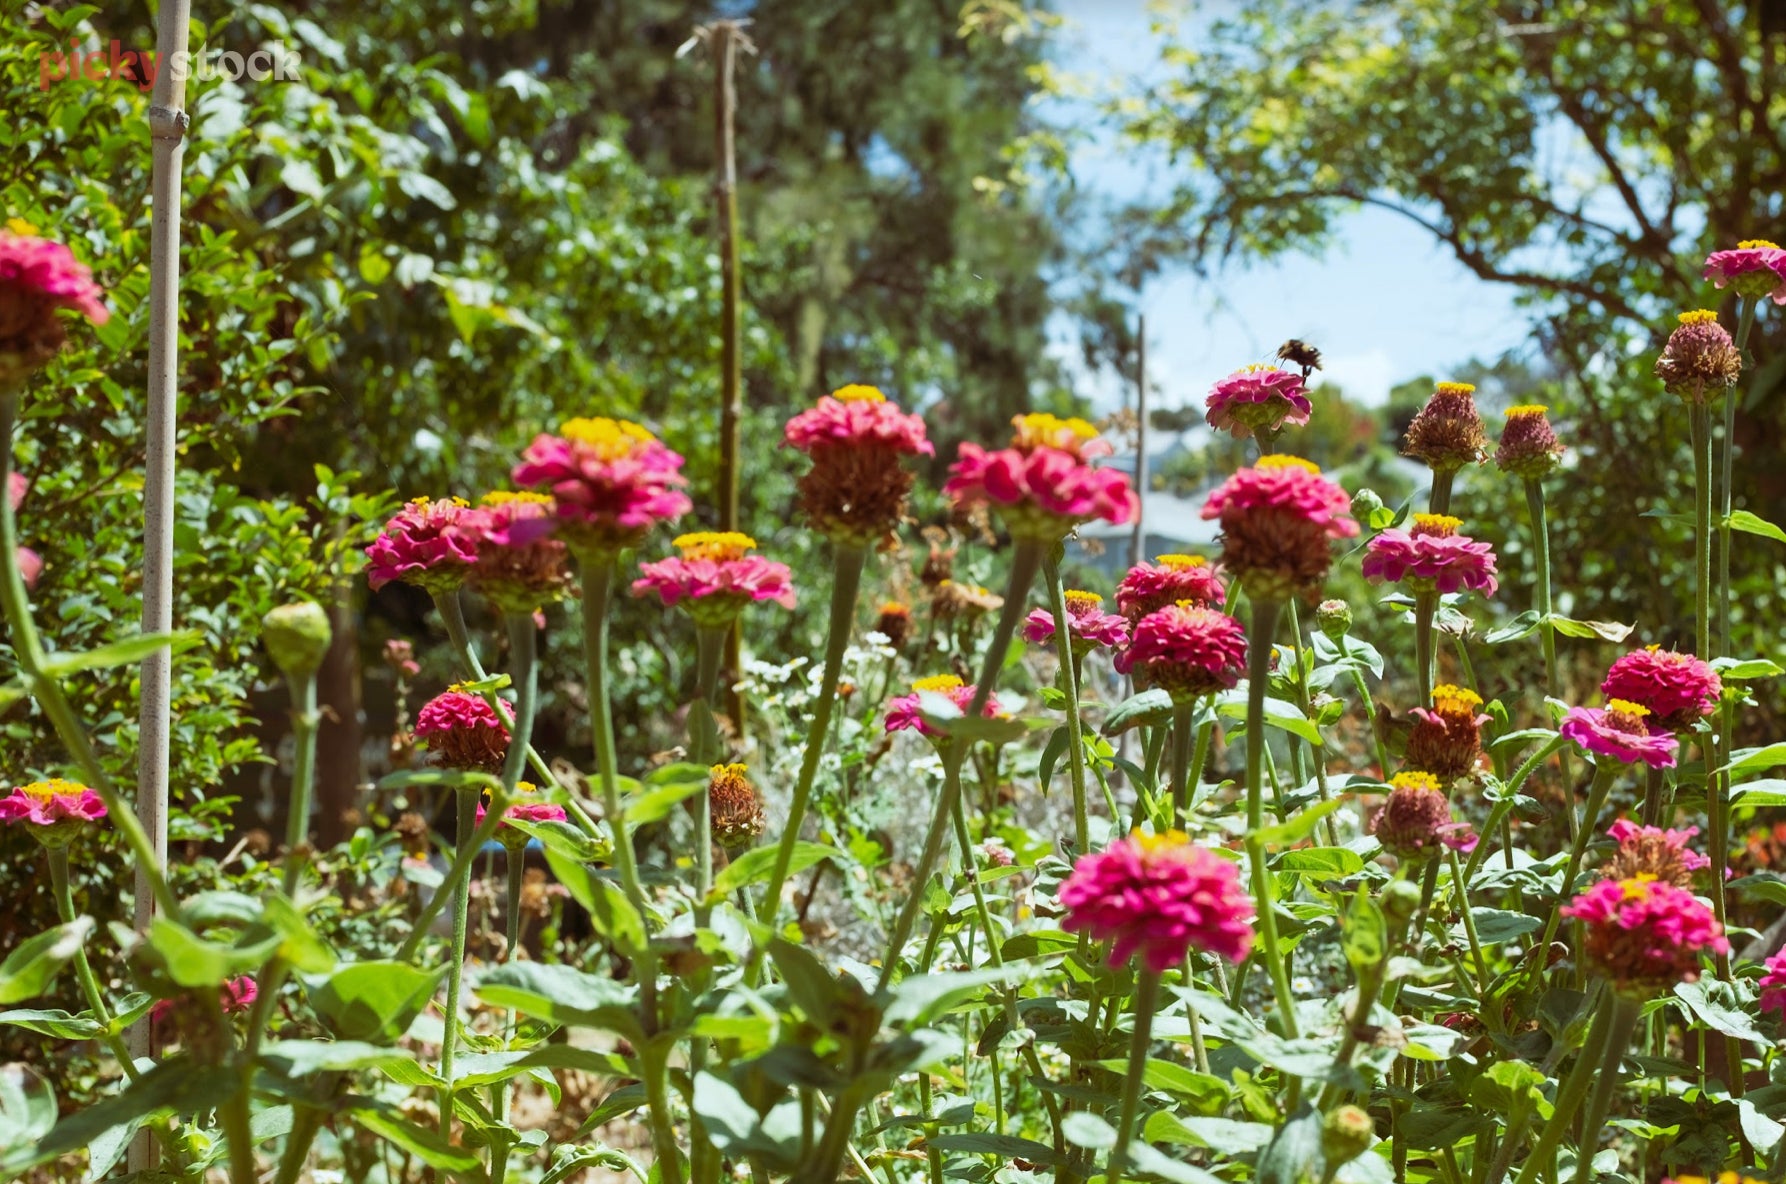 Close-up landscape of a patch of zinnias blooming on a sunny day in a garden, a bee is pictured pollinating one of the flowers.